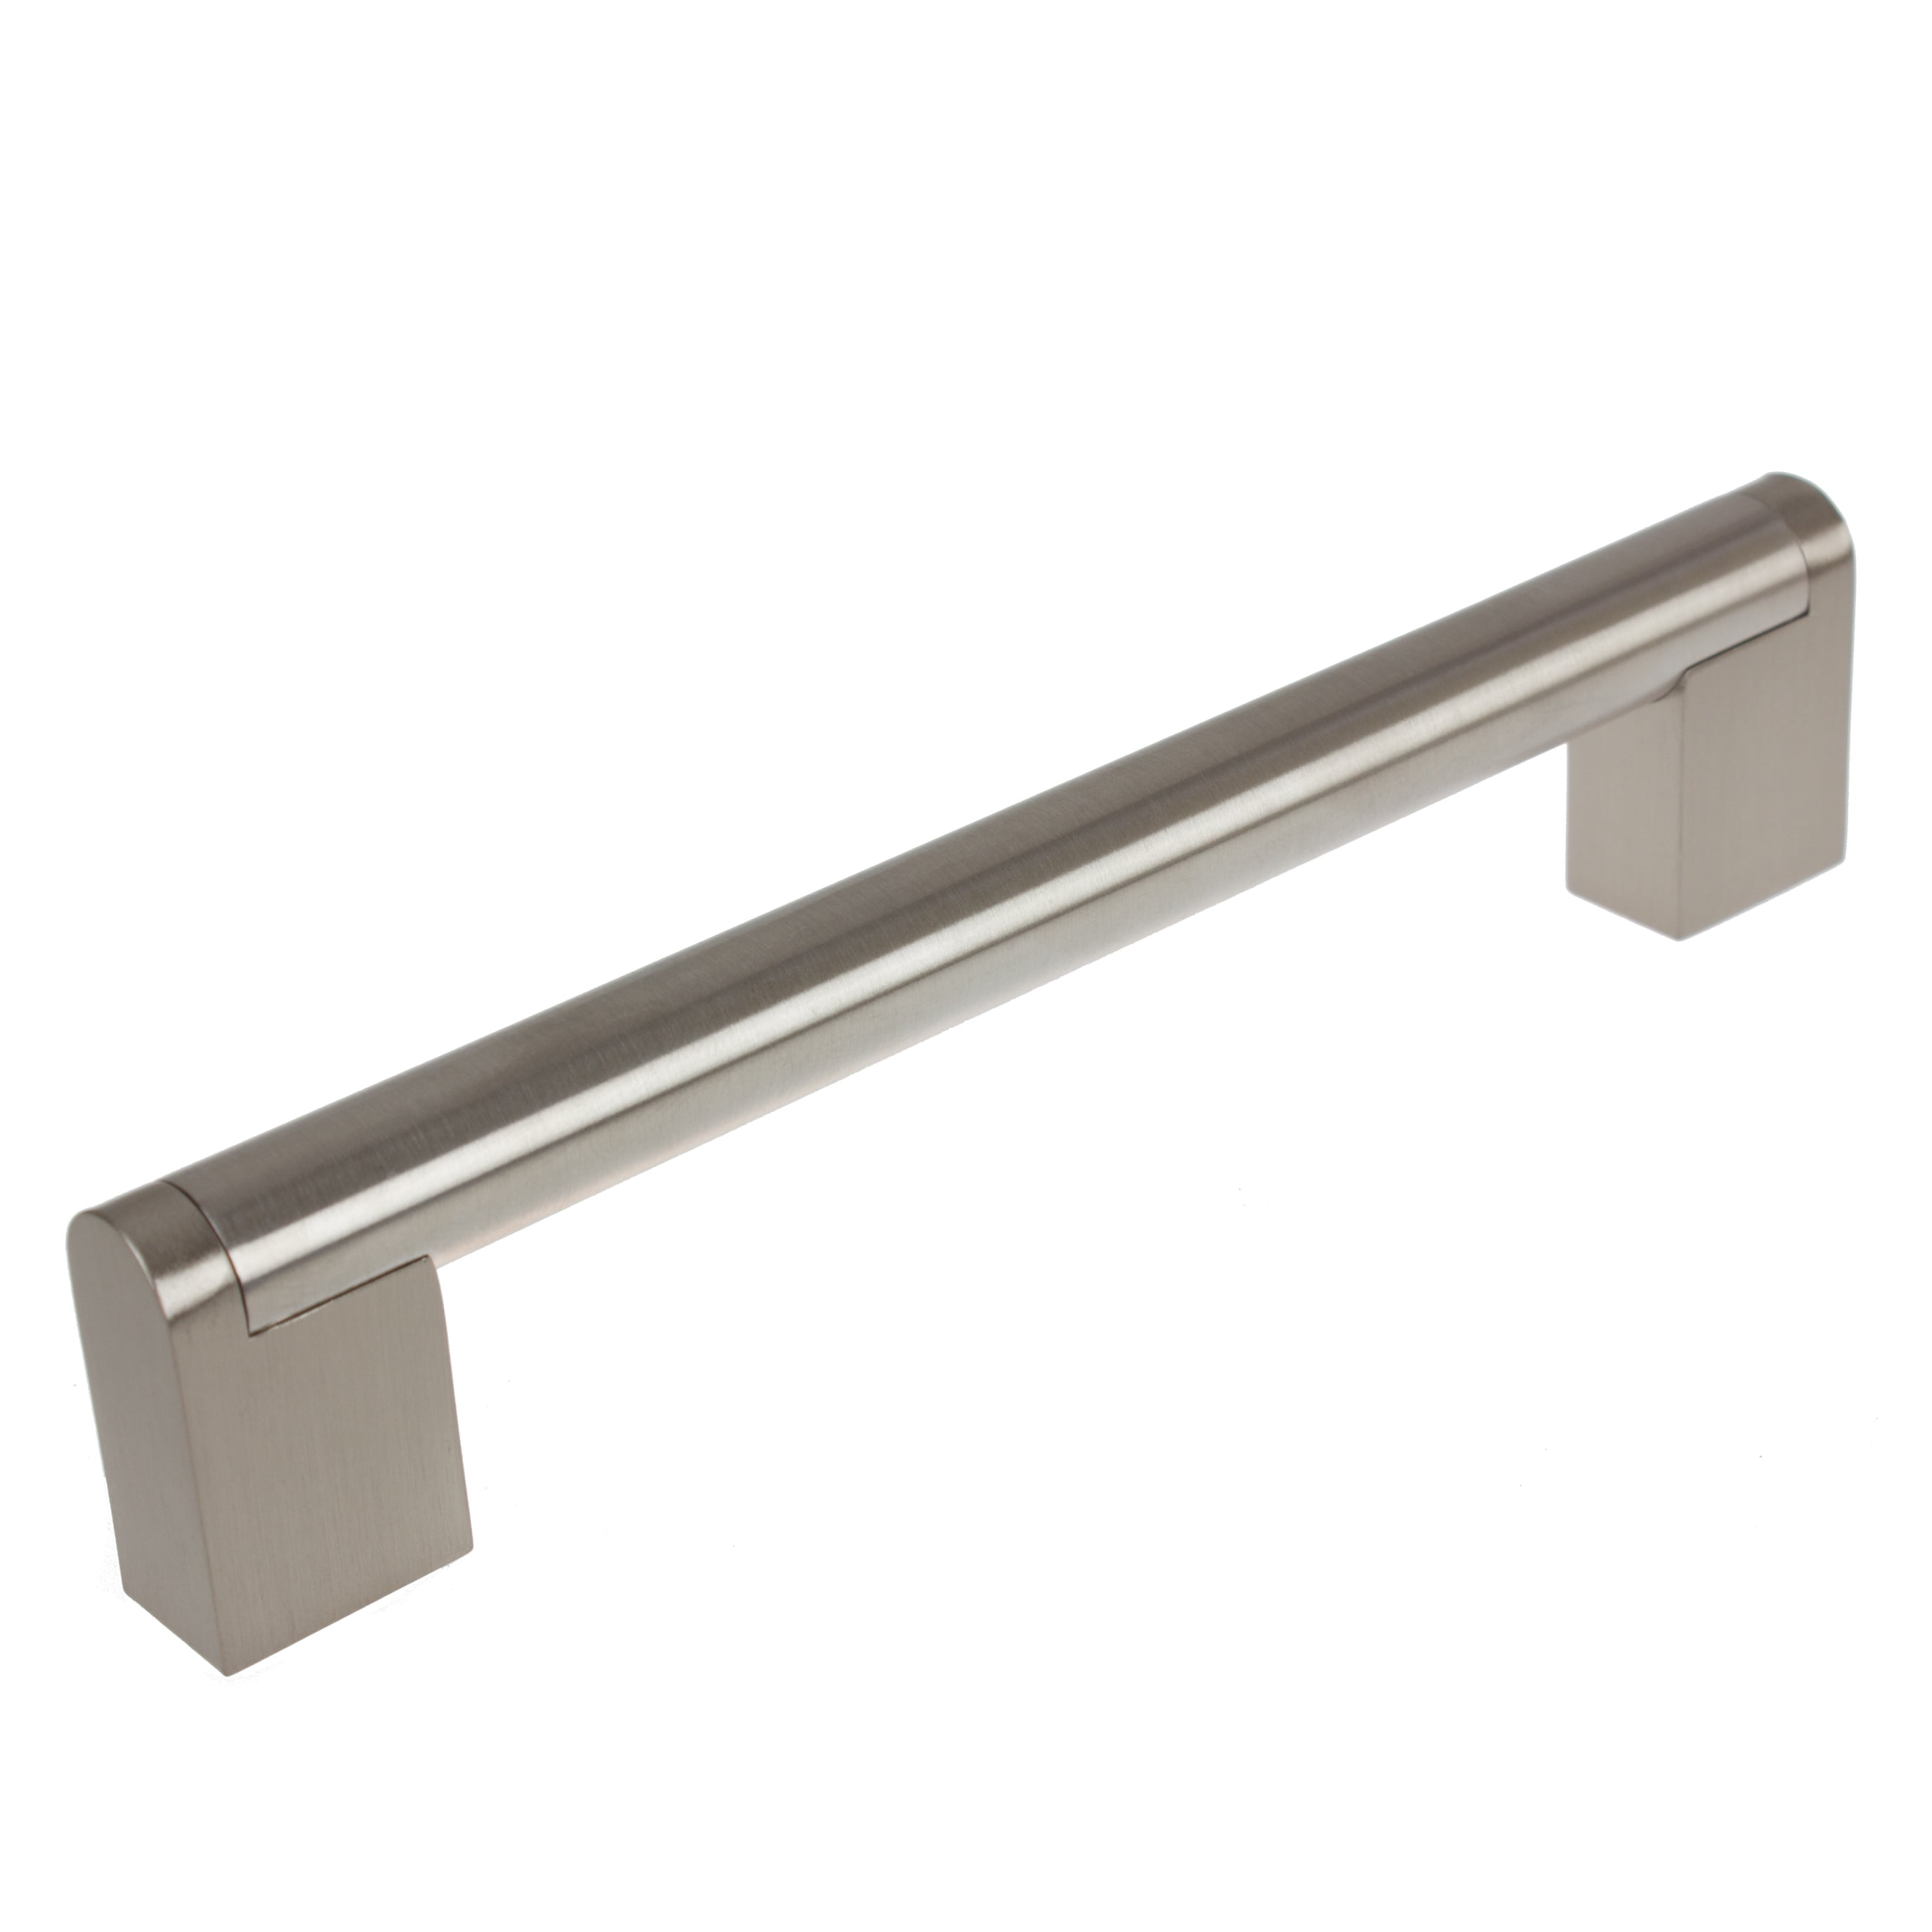 GlideRite 6-5/16 in. Center Stainless Steel Round Cross Cabinet Bar Pulls, Pack of 5 - image 1 of 5